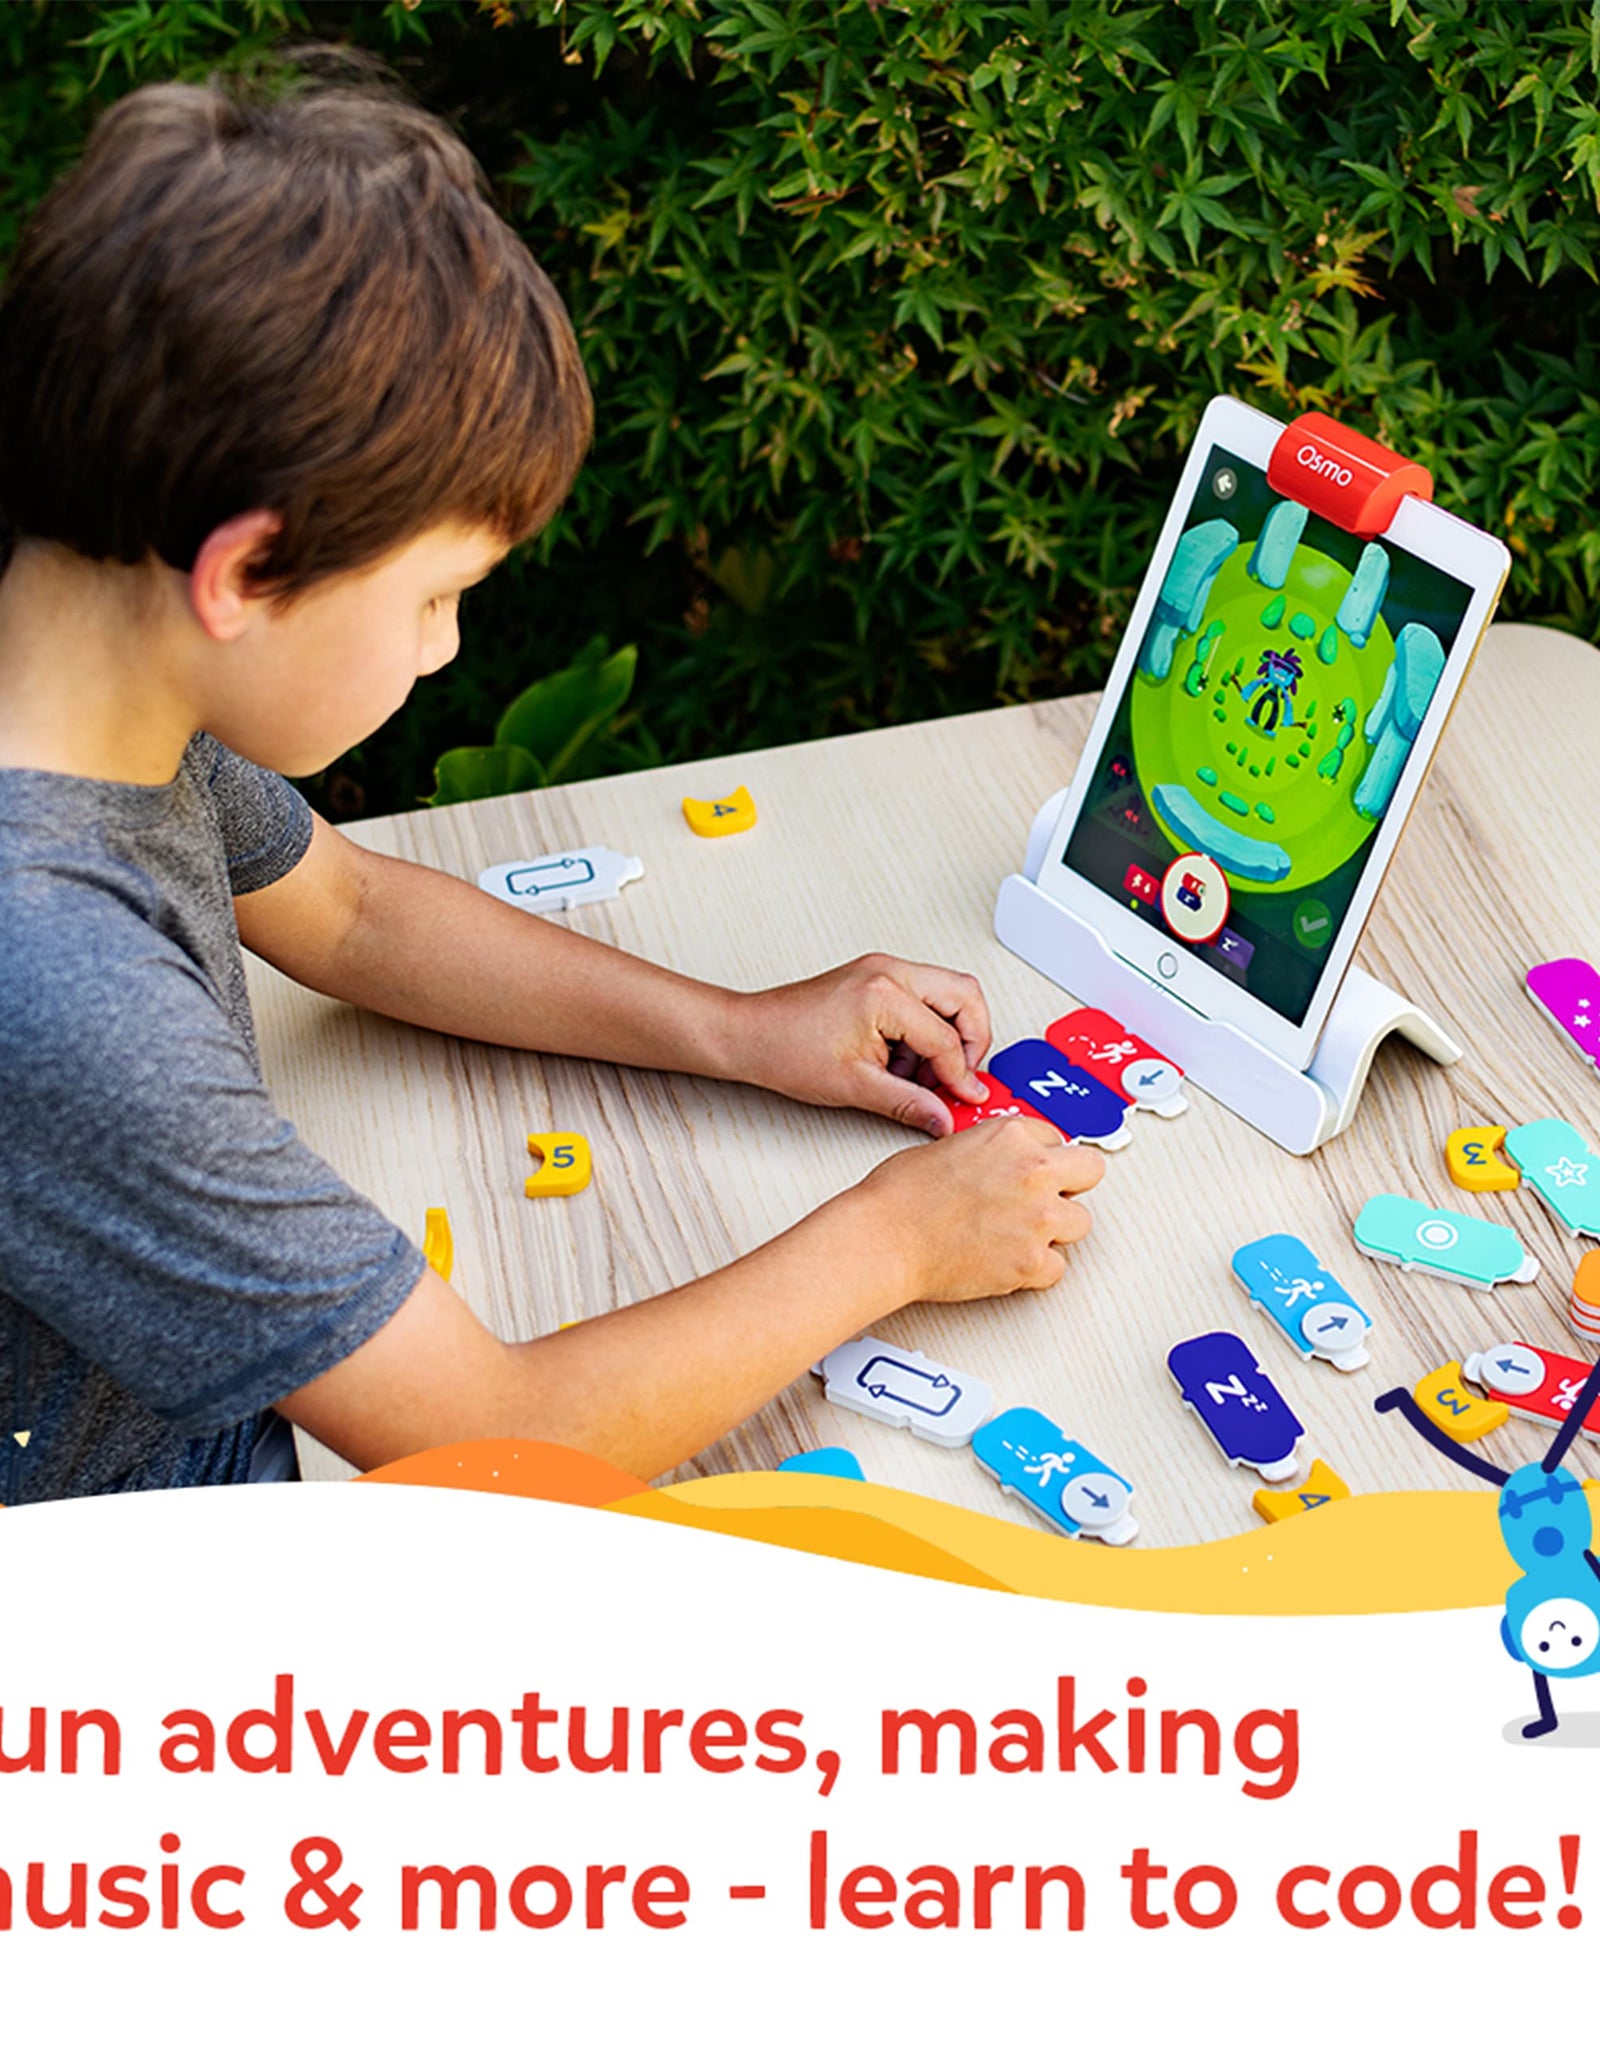 Osmo - Coding Starter Kit for iPad - 3 Educational Learning Games - Ages 5-10+ - Learn to Code, Coding Basics & Coding Puzzles - STEM Toy (Osmo iPad Base Included)